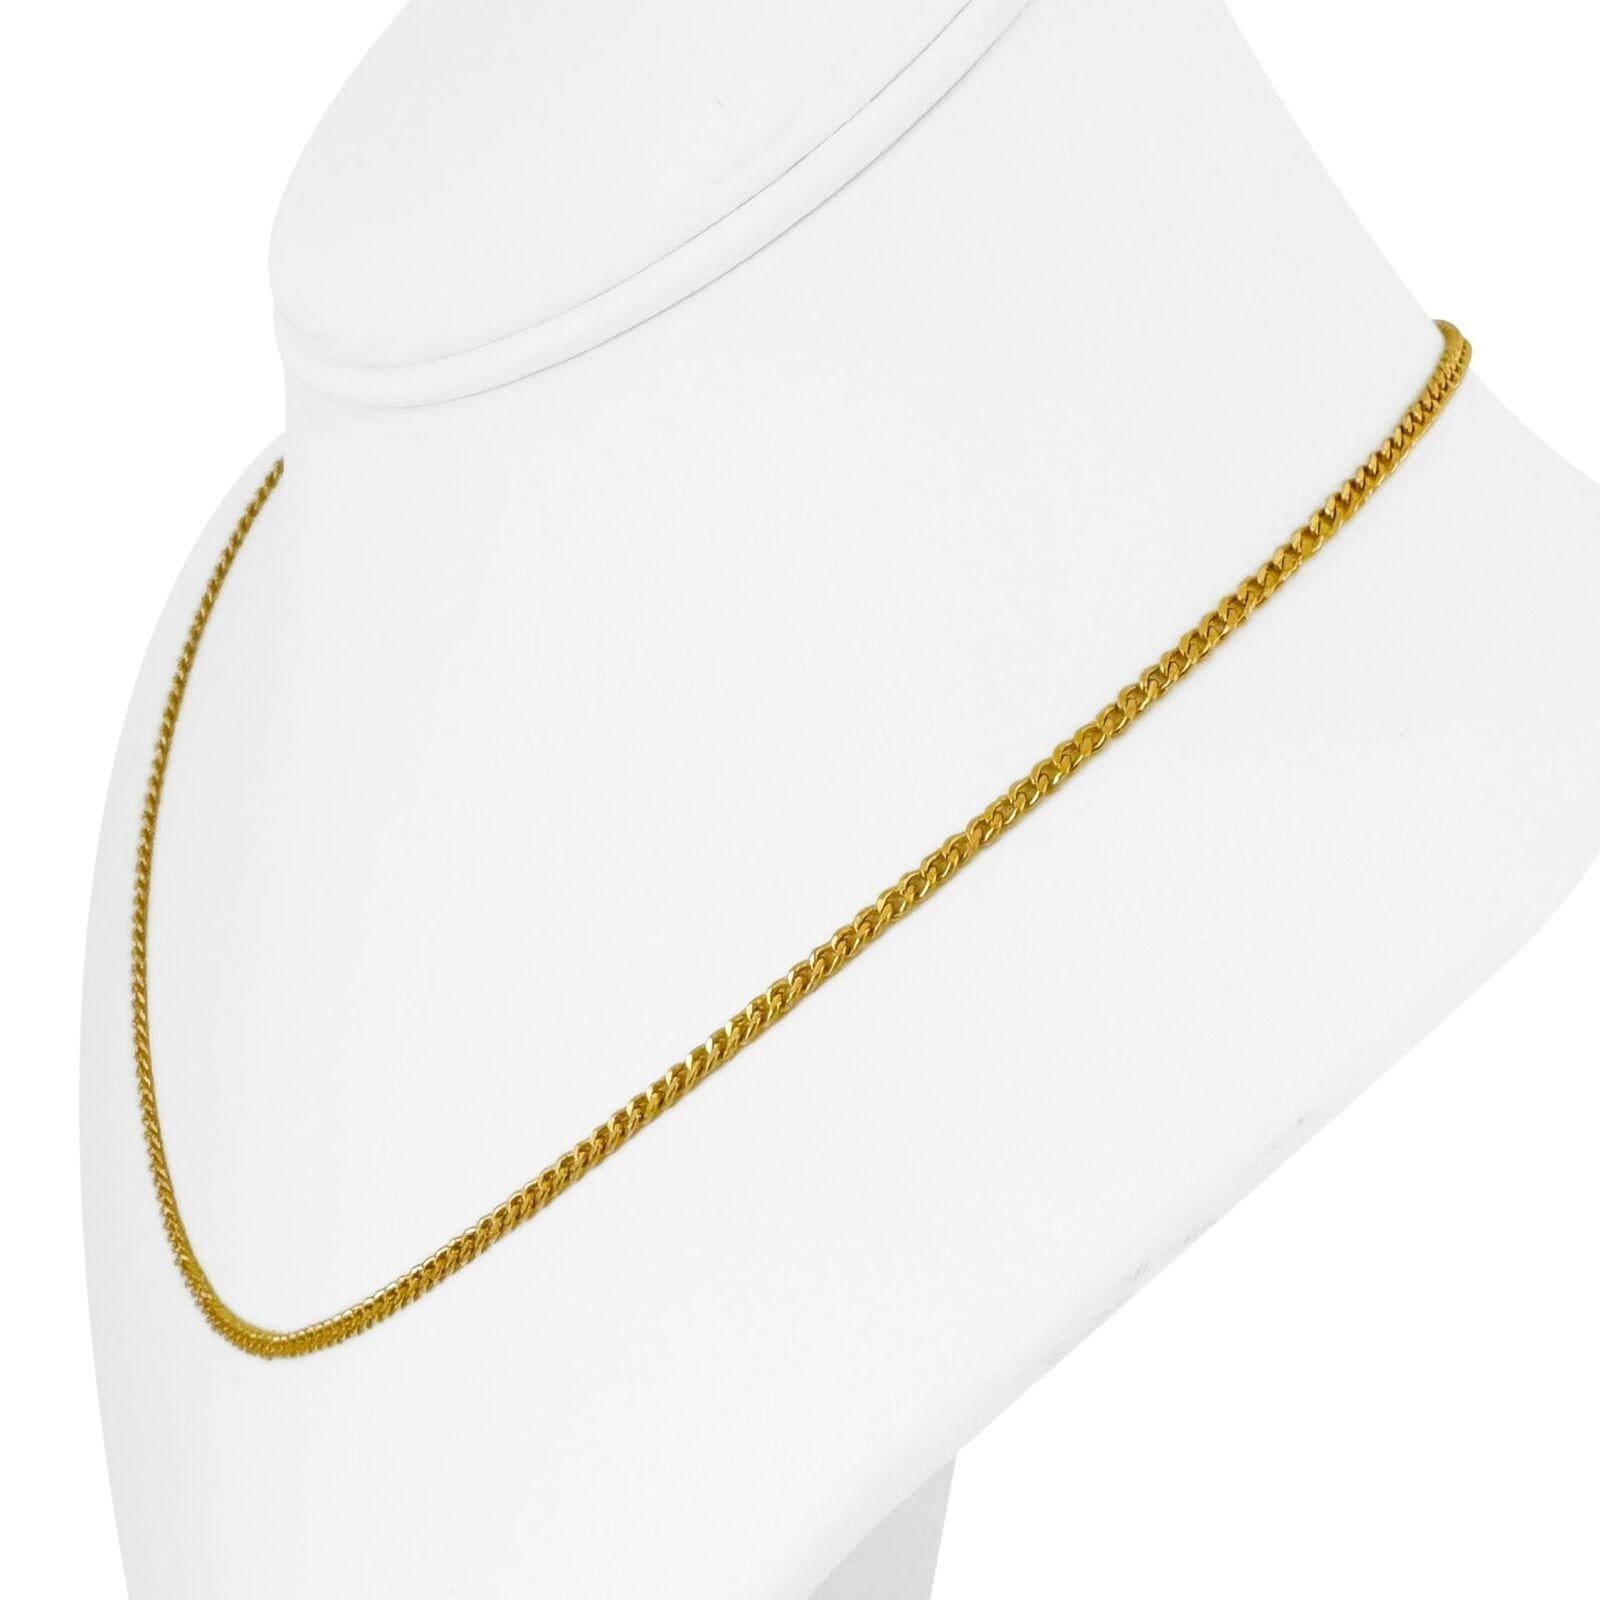 Collier en Or Jaune Pur 24k 11.1g Solid Thin 1.5mm Curb Link Chain 18